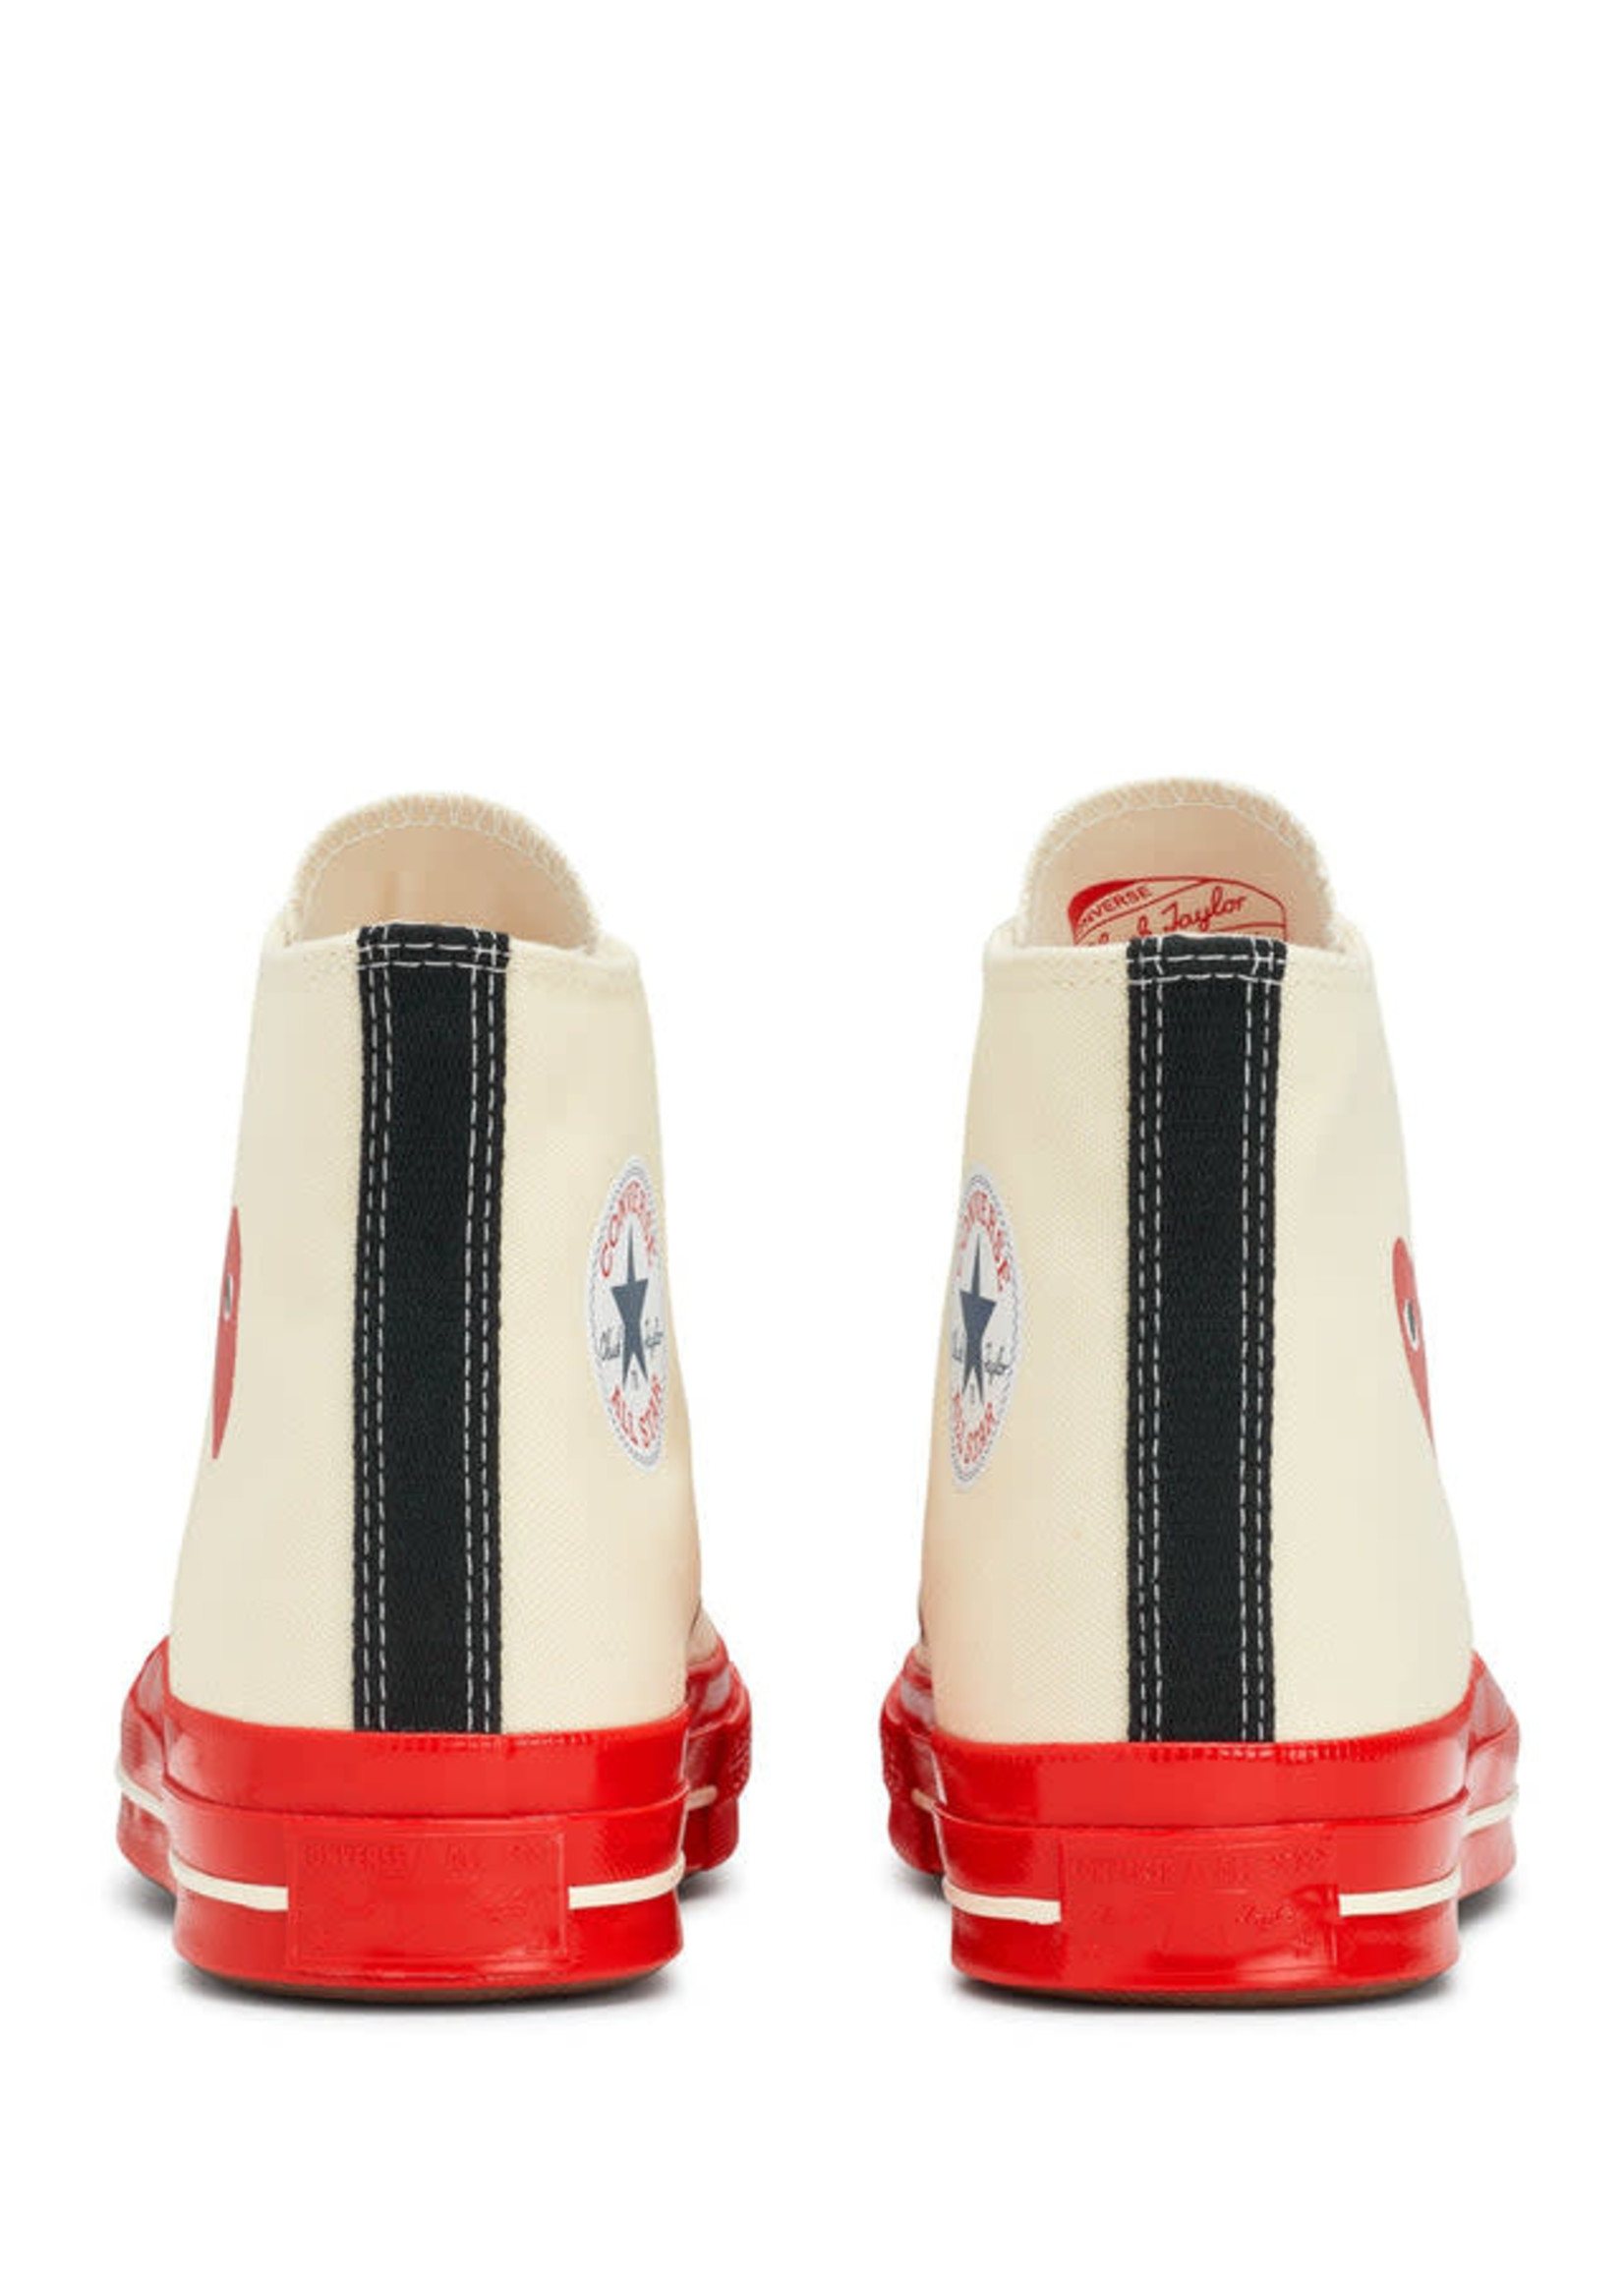 COMME des GARÇONS PLAY Converse High Top White and Red